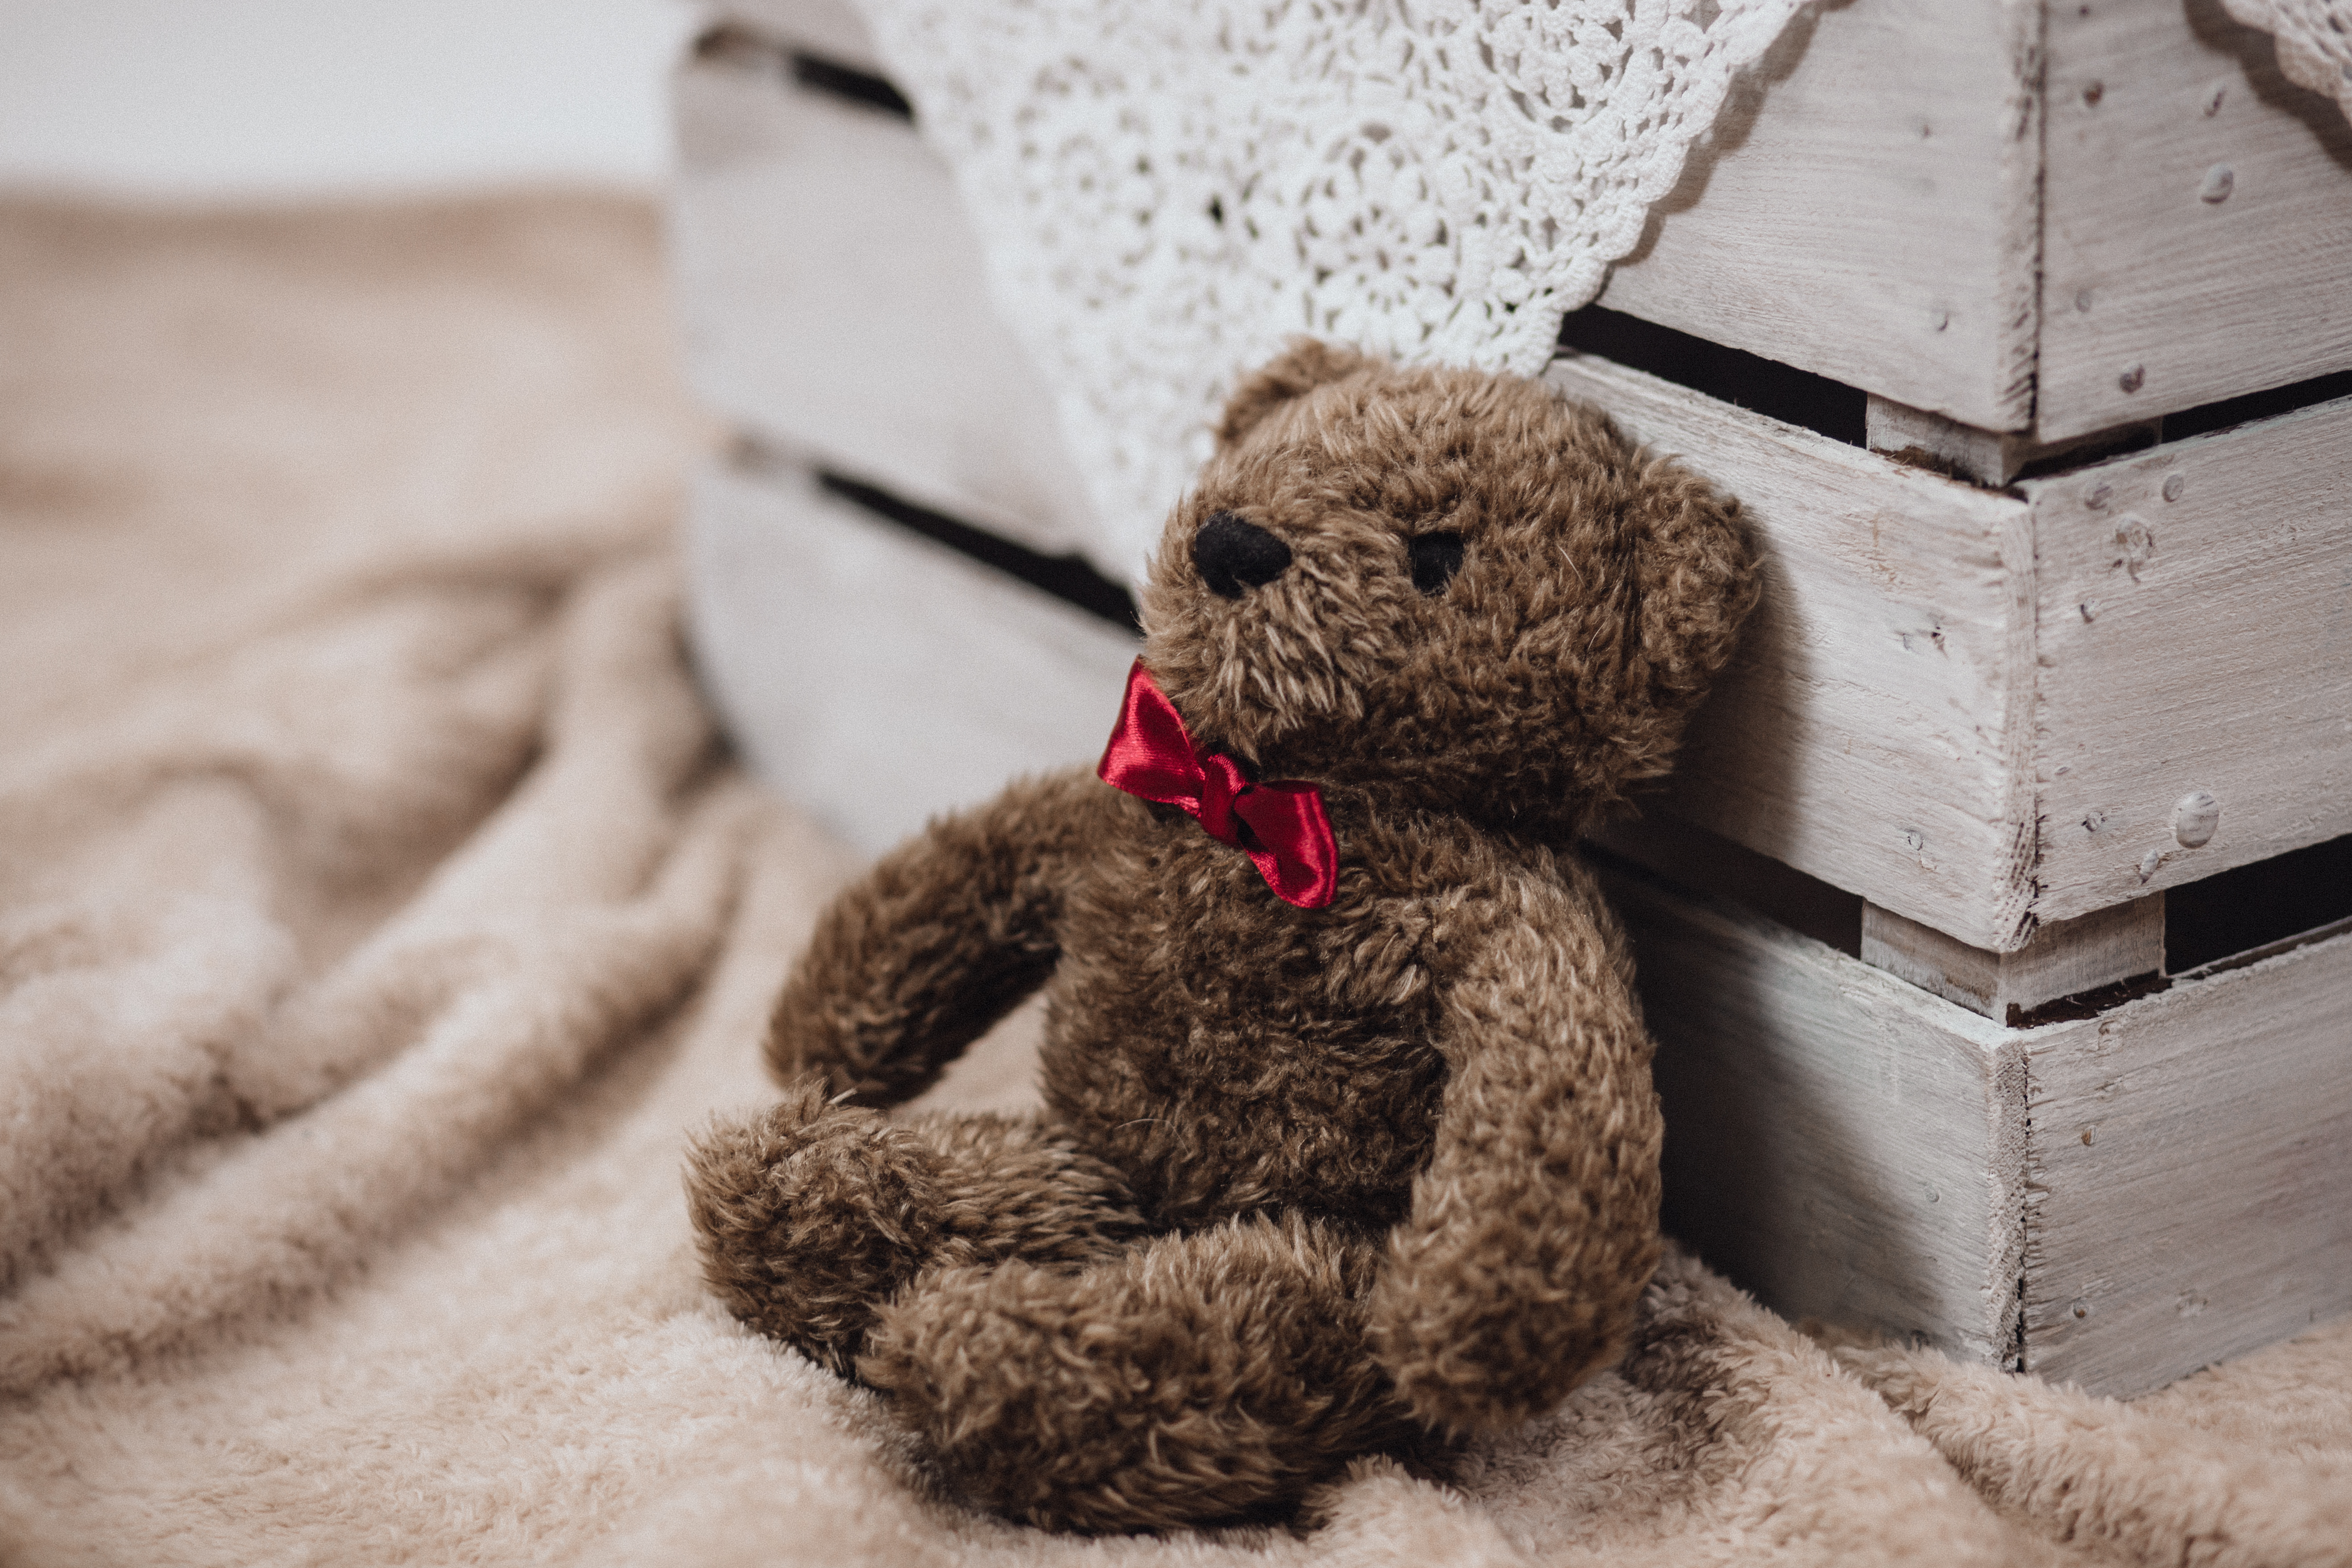 104393 download wallpaper teddy bear, miscellanea, miscellaneous, toy, bow screensavers and pictures for free